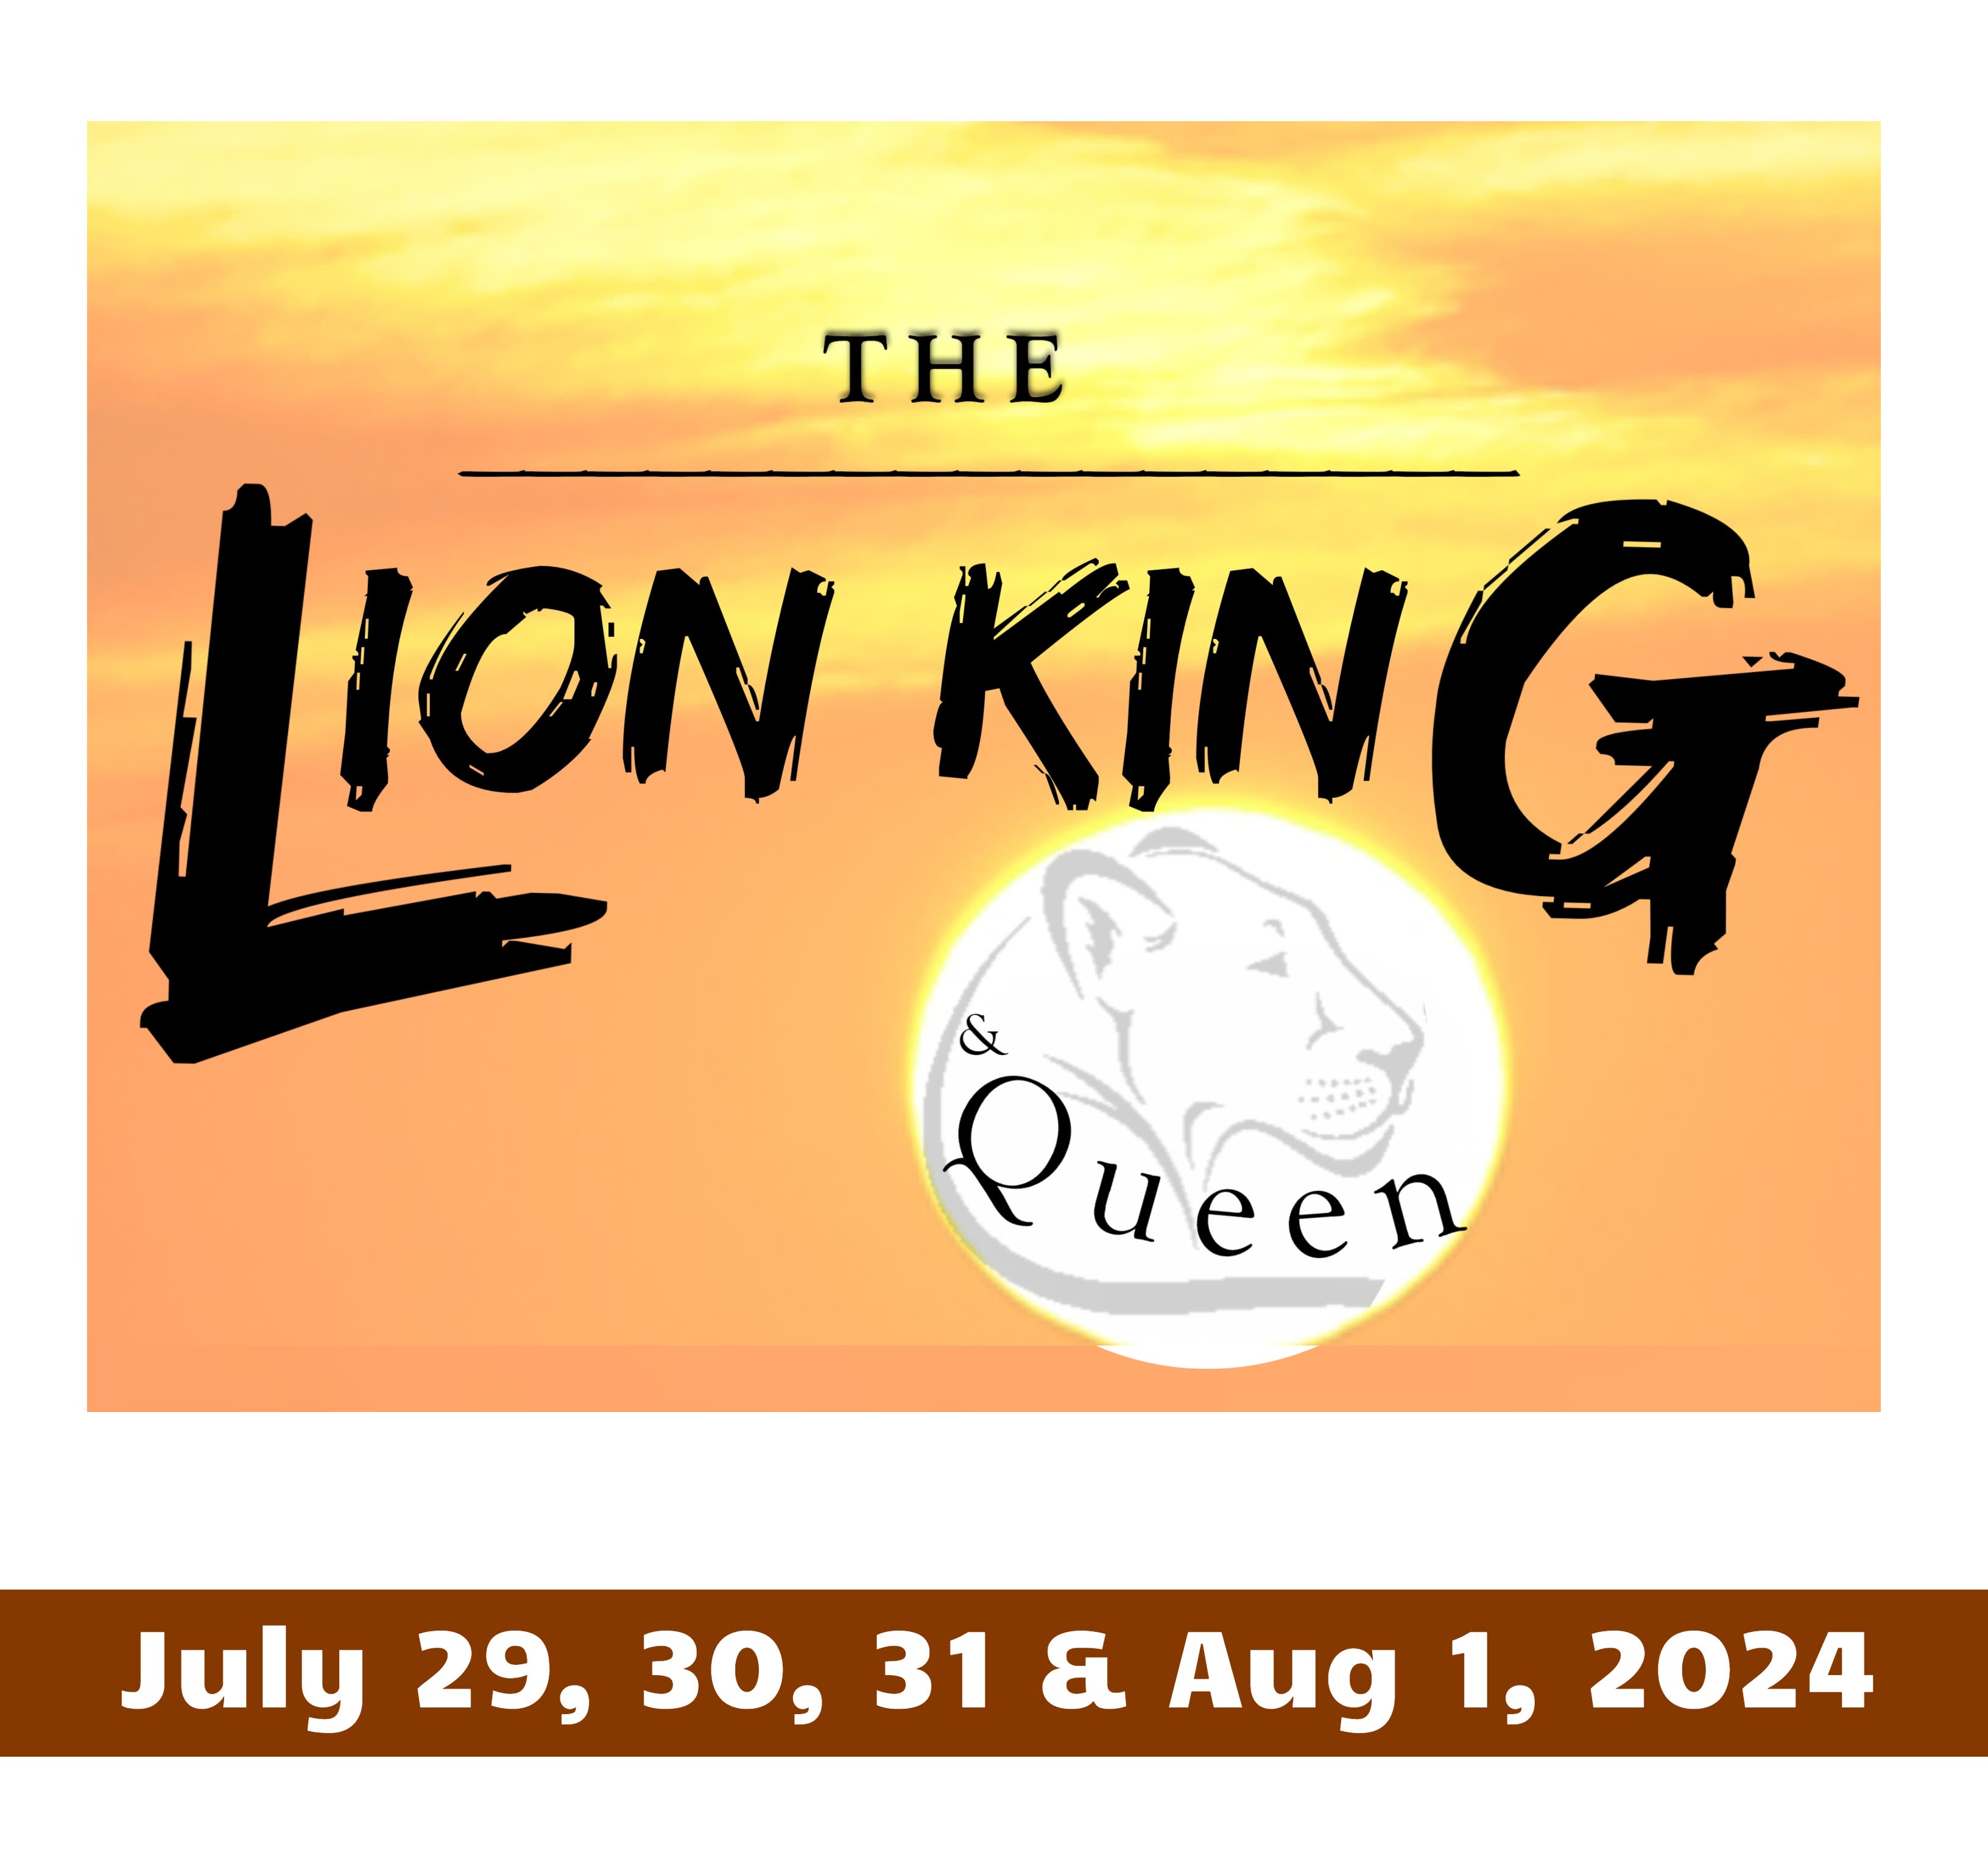 Lion King and Queen Musical Theater Camp ages 6-14 with Stars of Tomorrow Children's Theater